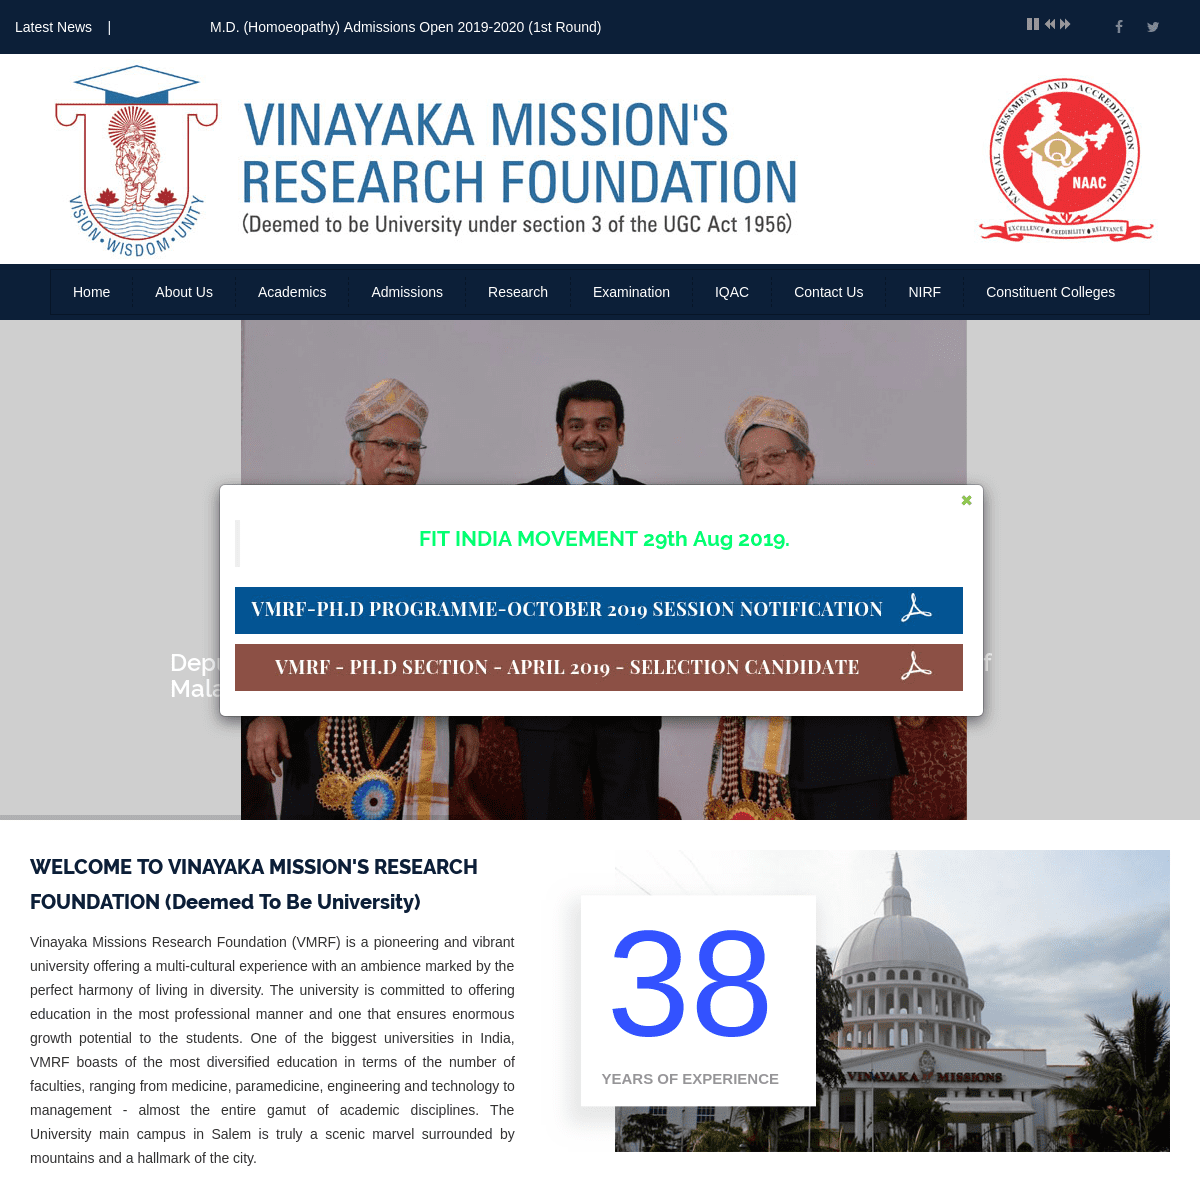 WELCOME TO VINAYAKA MISSIONS RESEARCH FOUNDATION